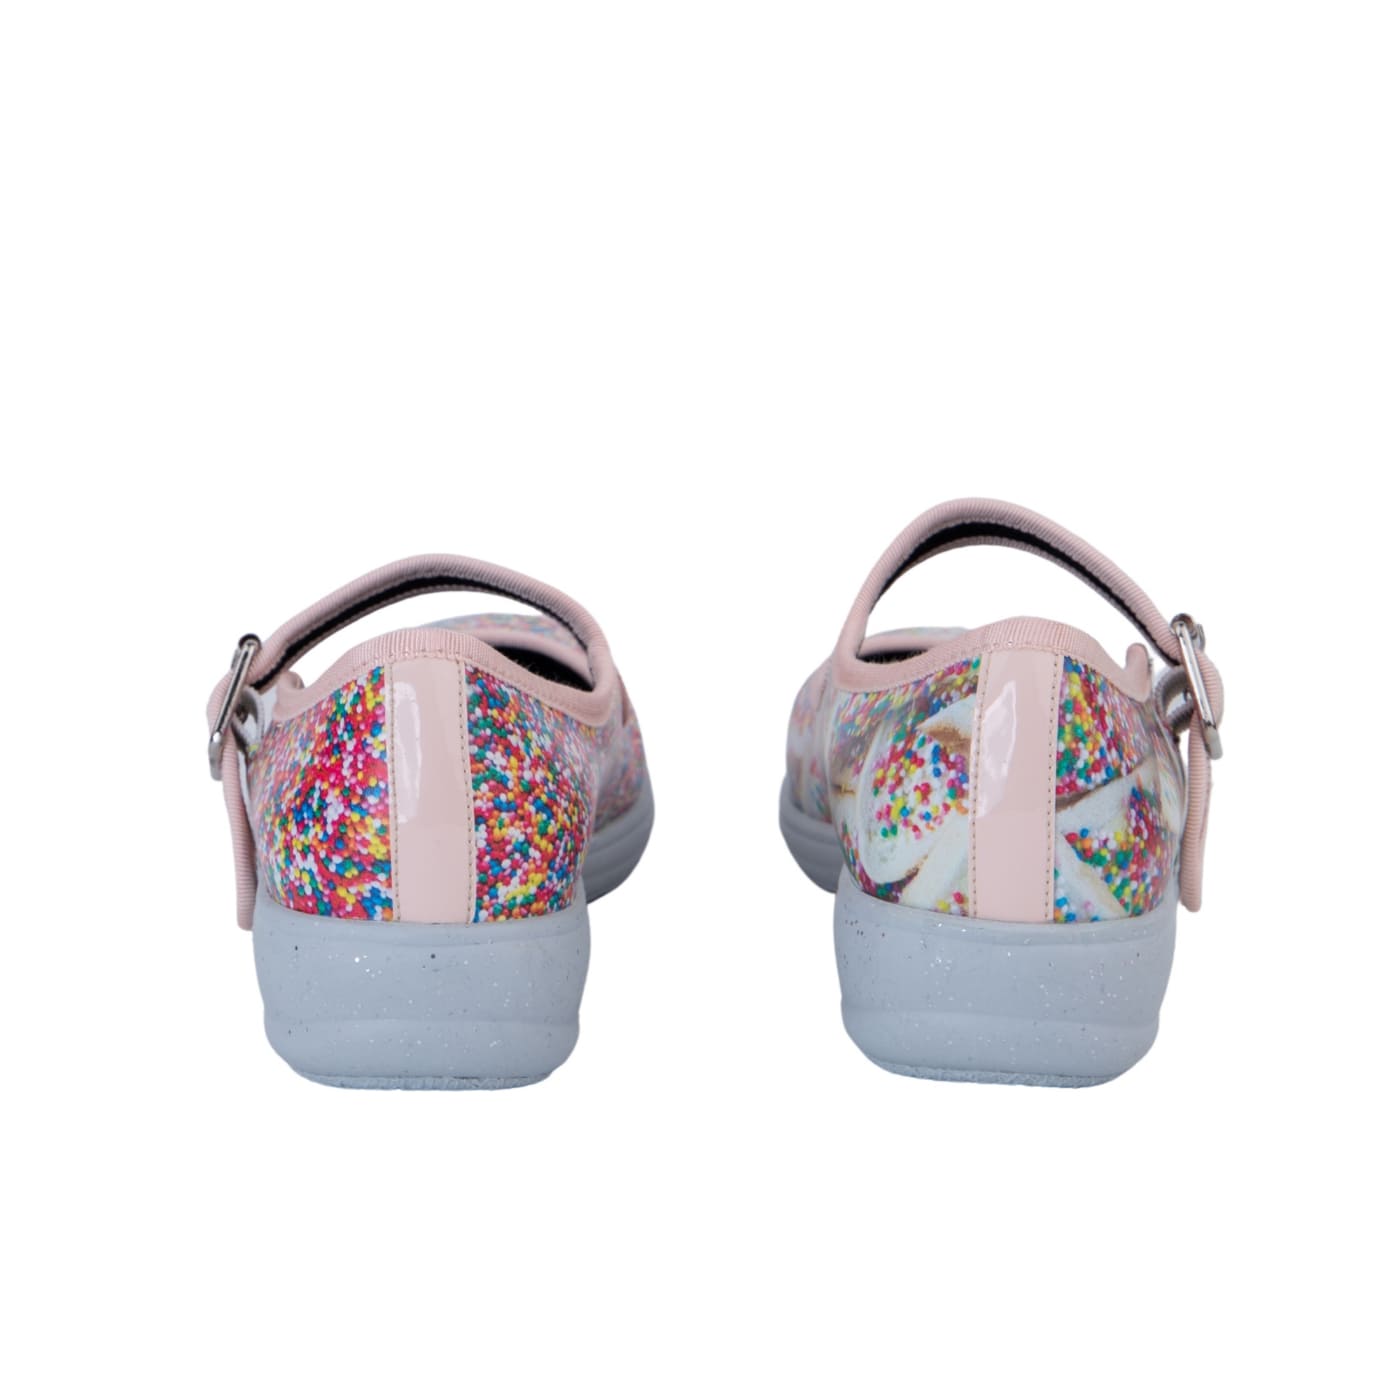 Sprinkles Mary Janes by RainbowsAndFairies.com.au (Fairy Bread - 100s & 1000s - Mismatched Shoes - Glitter Soles - Glitter - Quirky) - SKU: FW_MARYJ_SPRNK_ORG - Pic-05